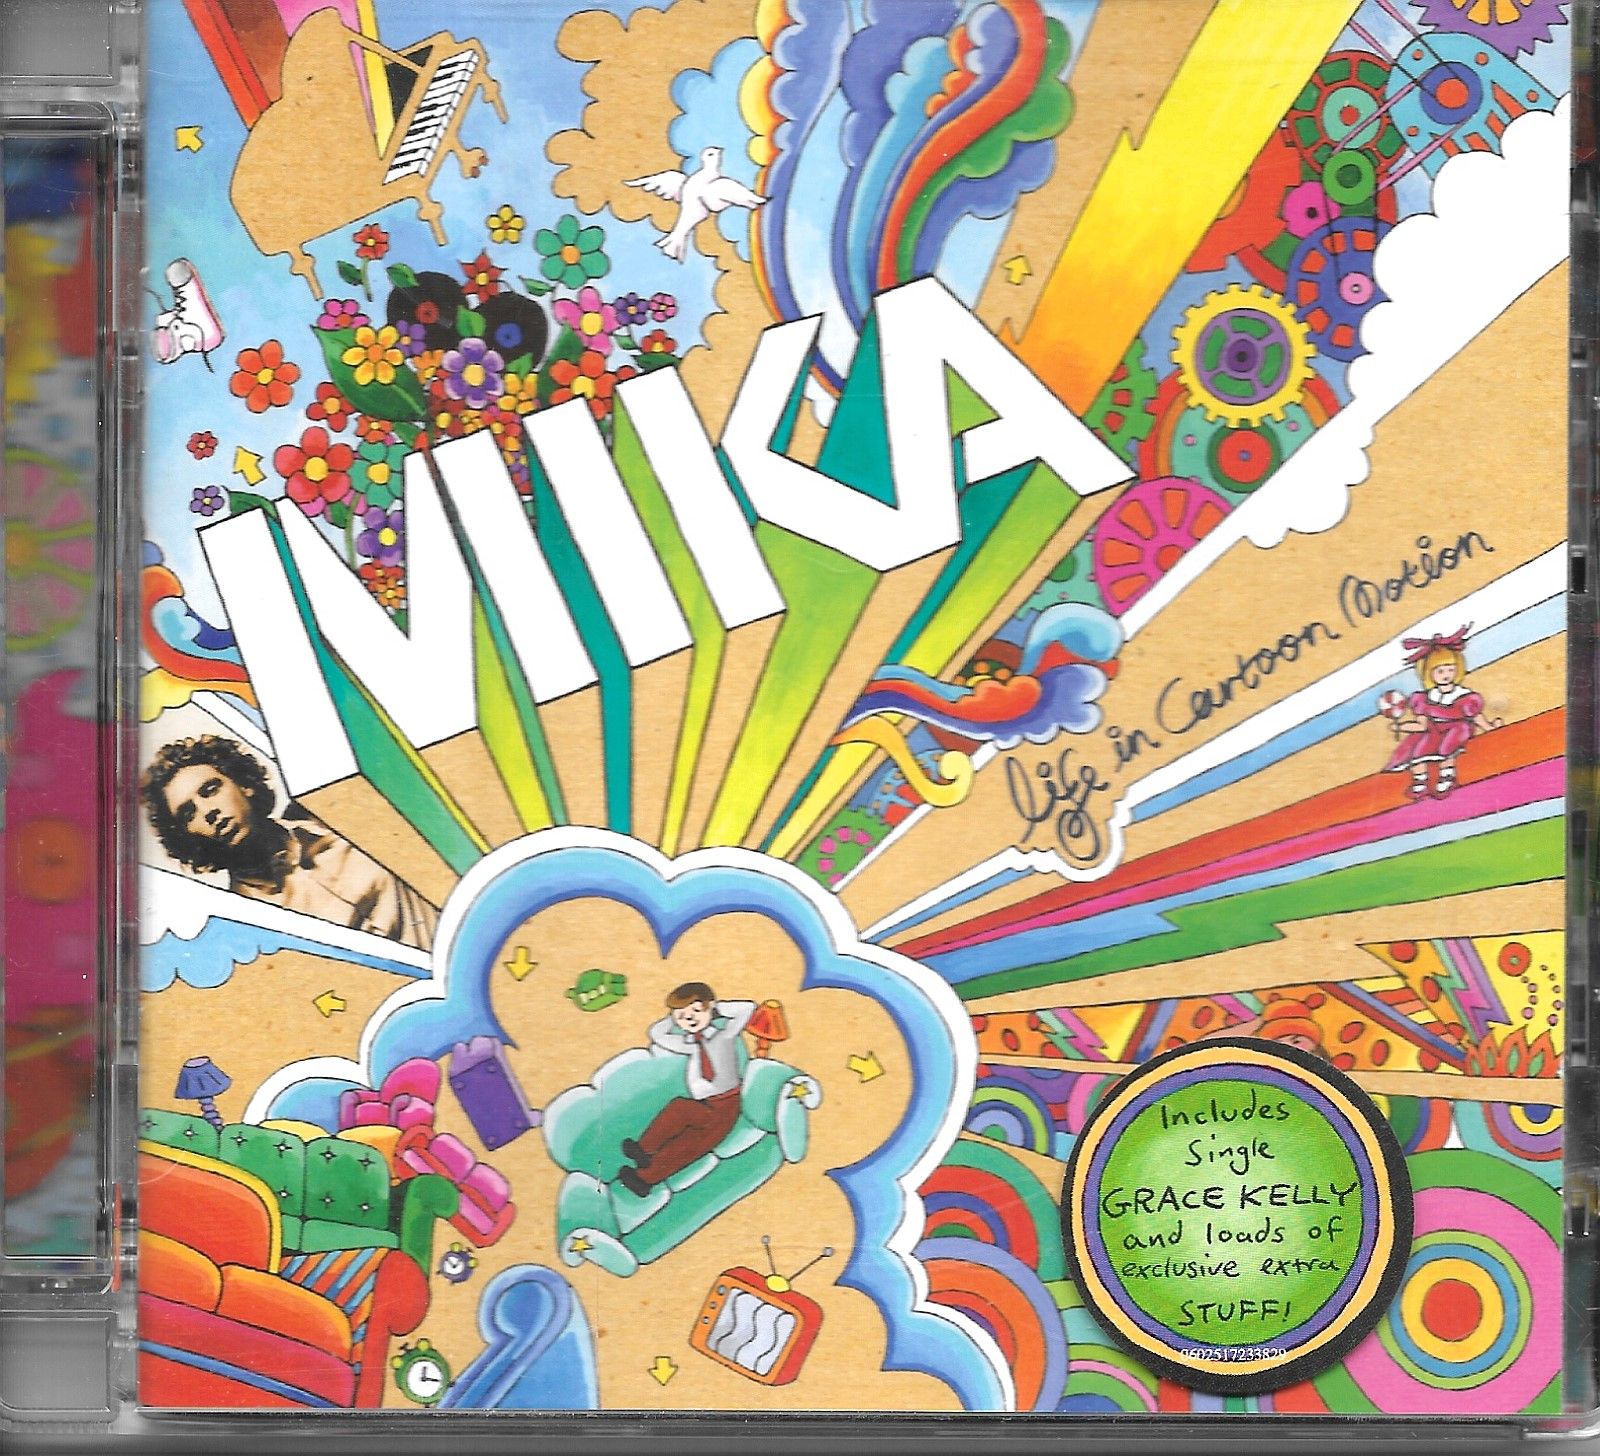 Mika - Life In Cartoon Motion [CD Album - 2007] - Relax (Take It